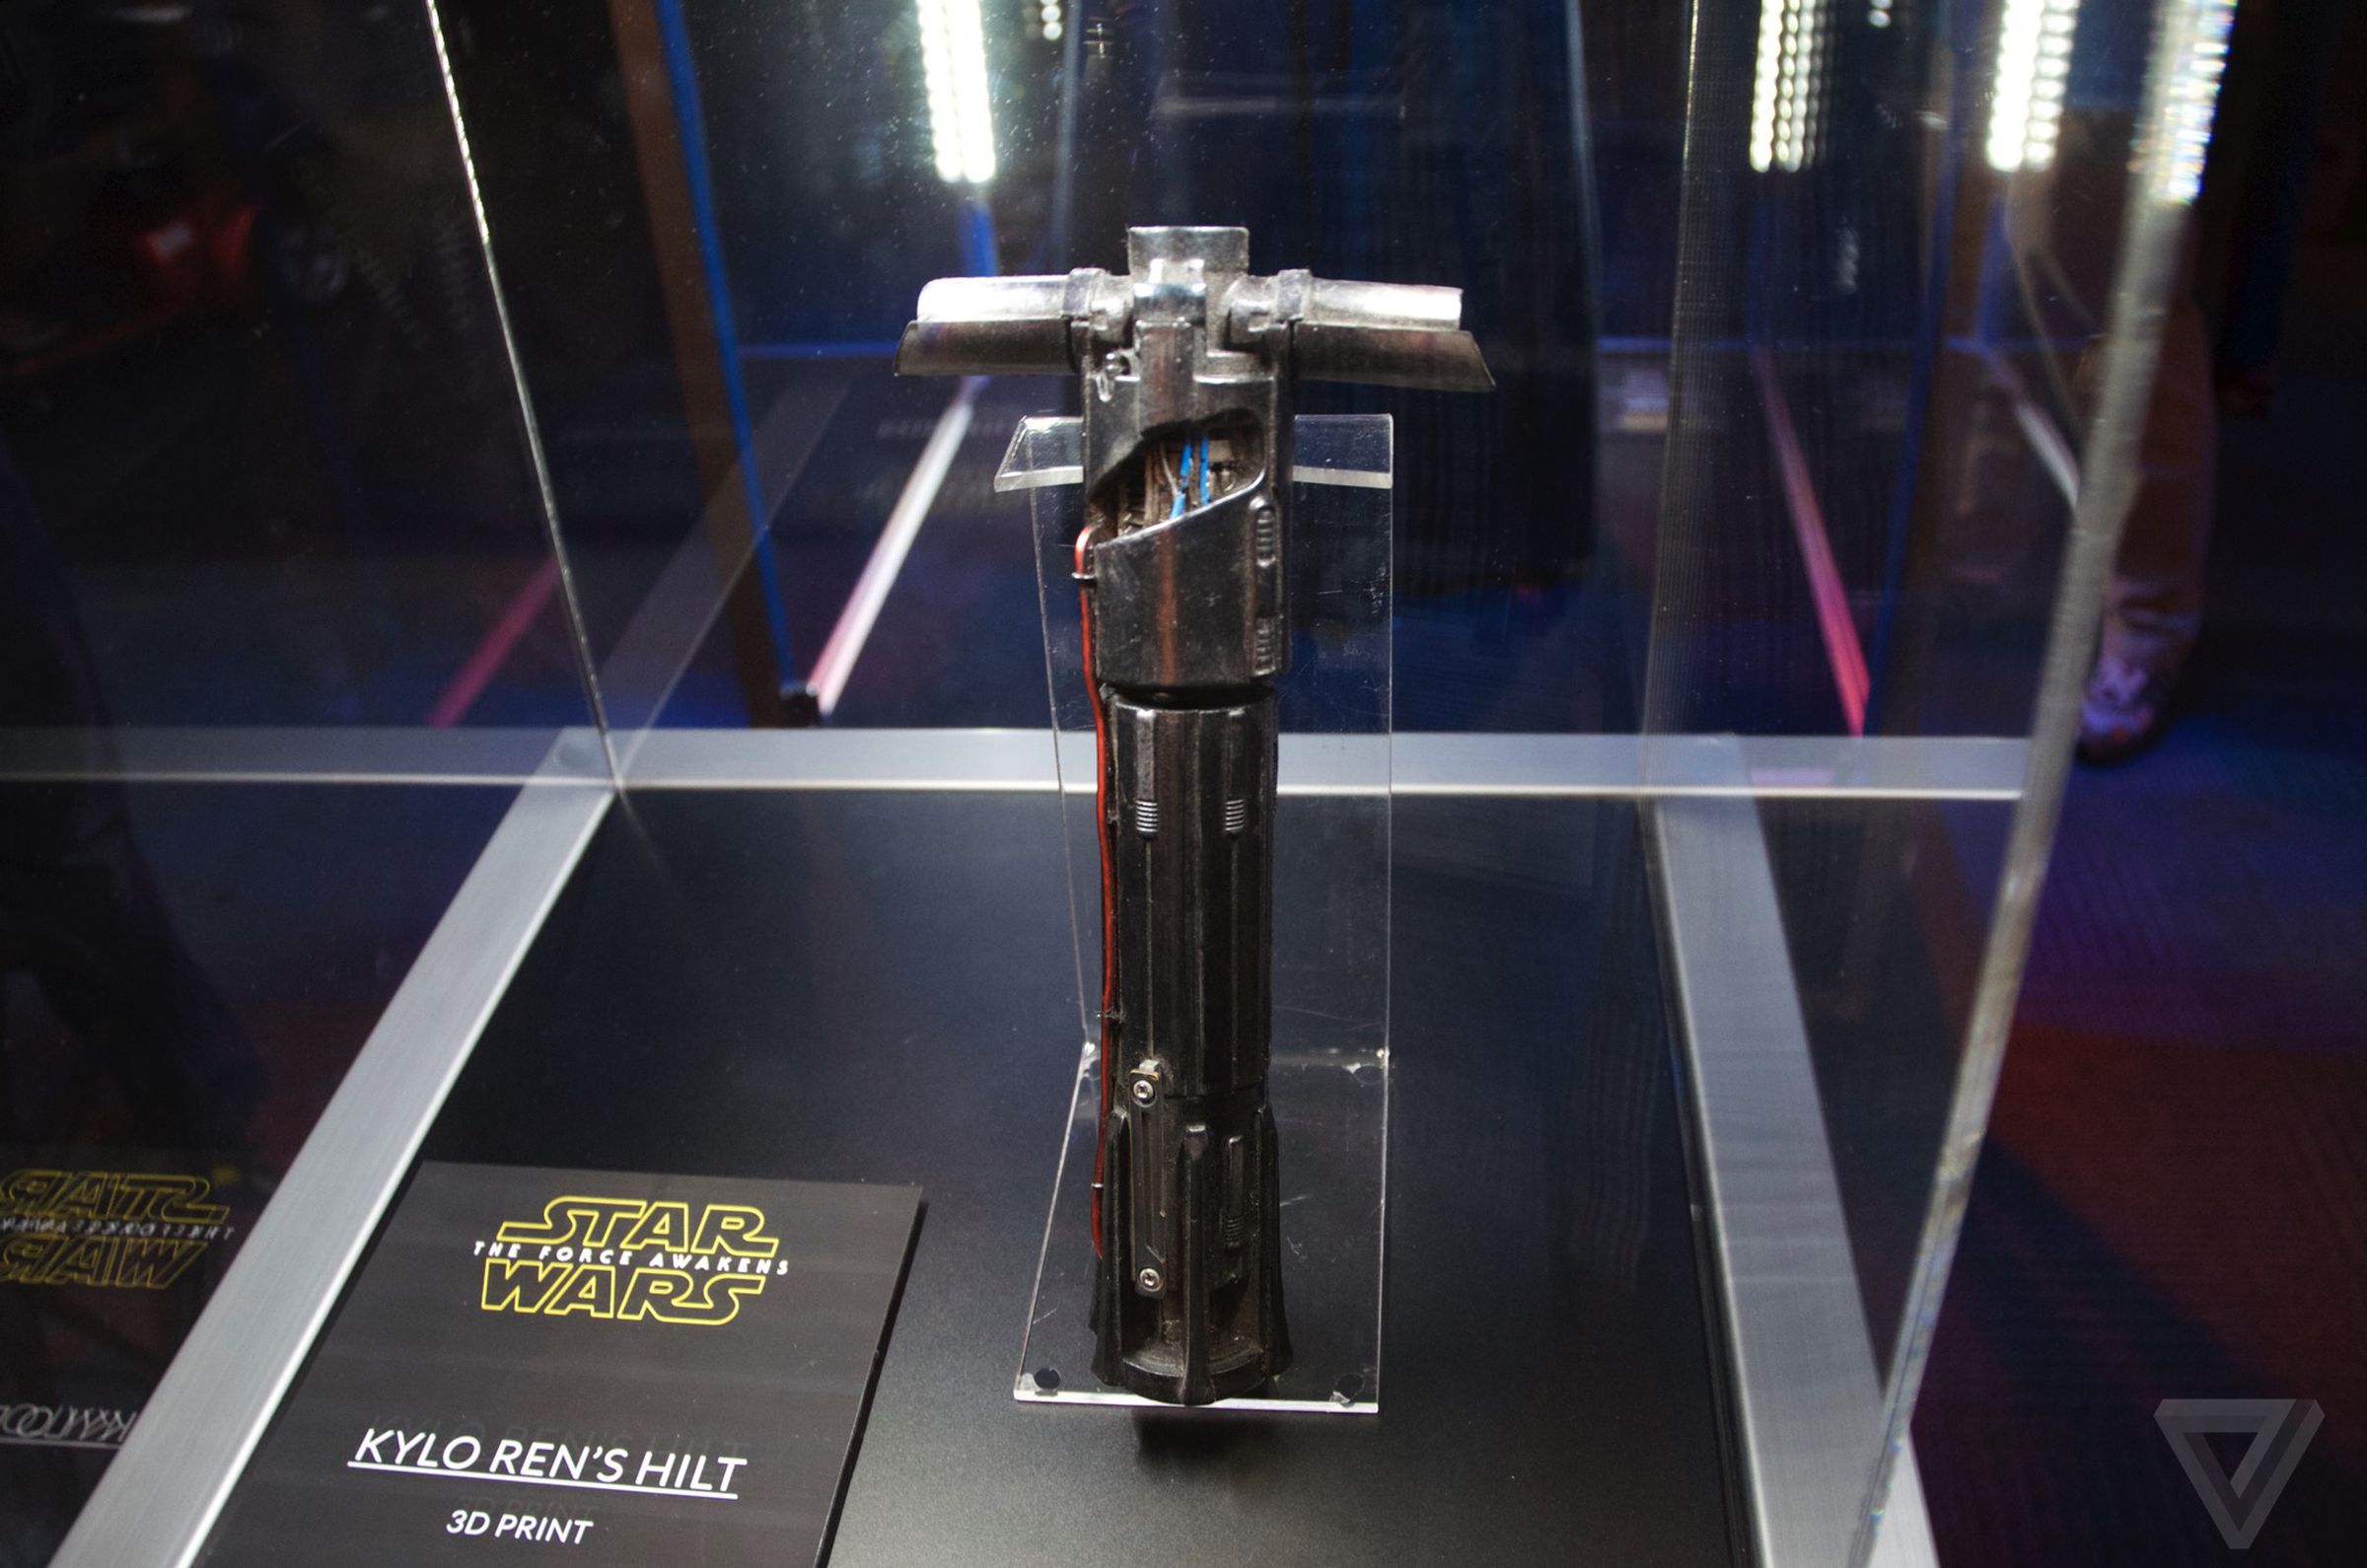 Star Wars: The Force Awakens exhibit images